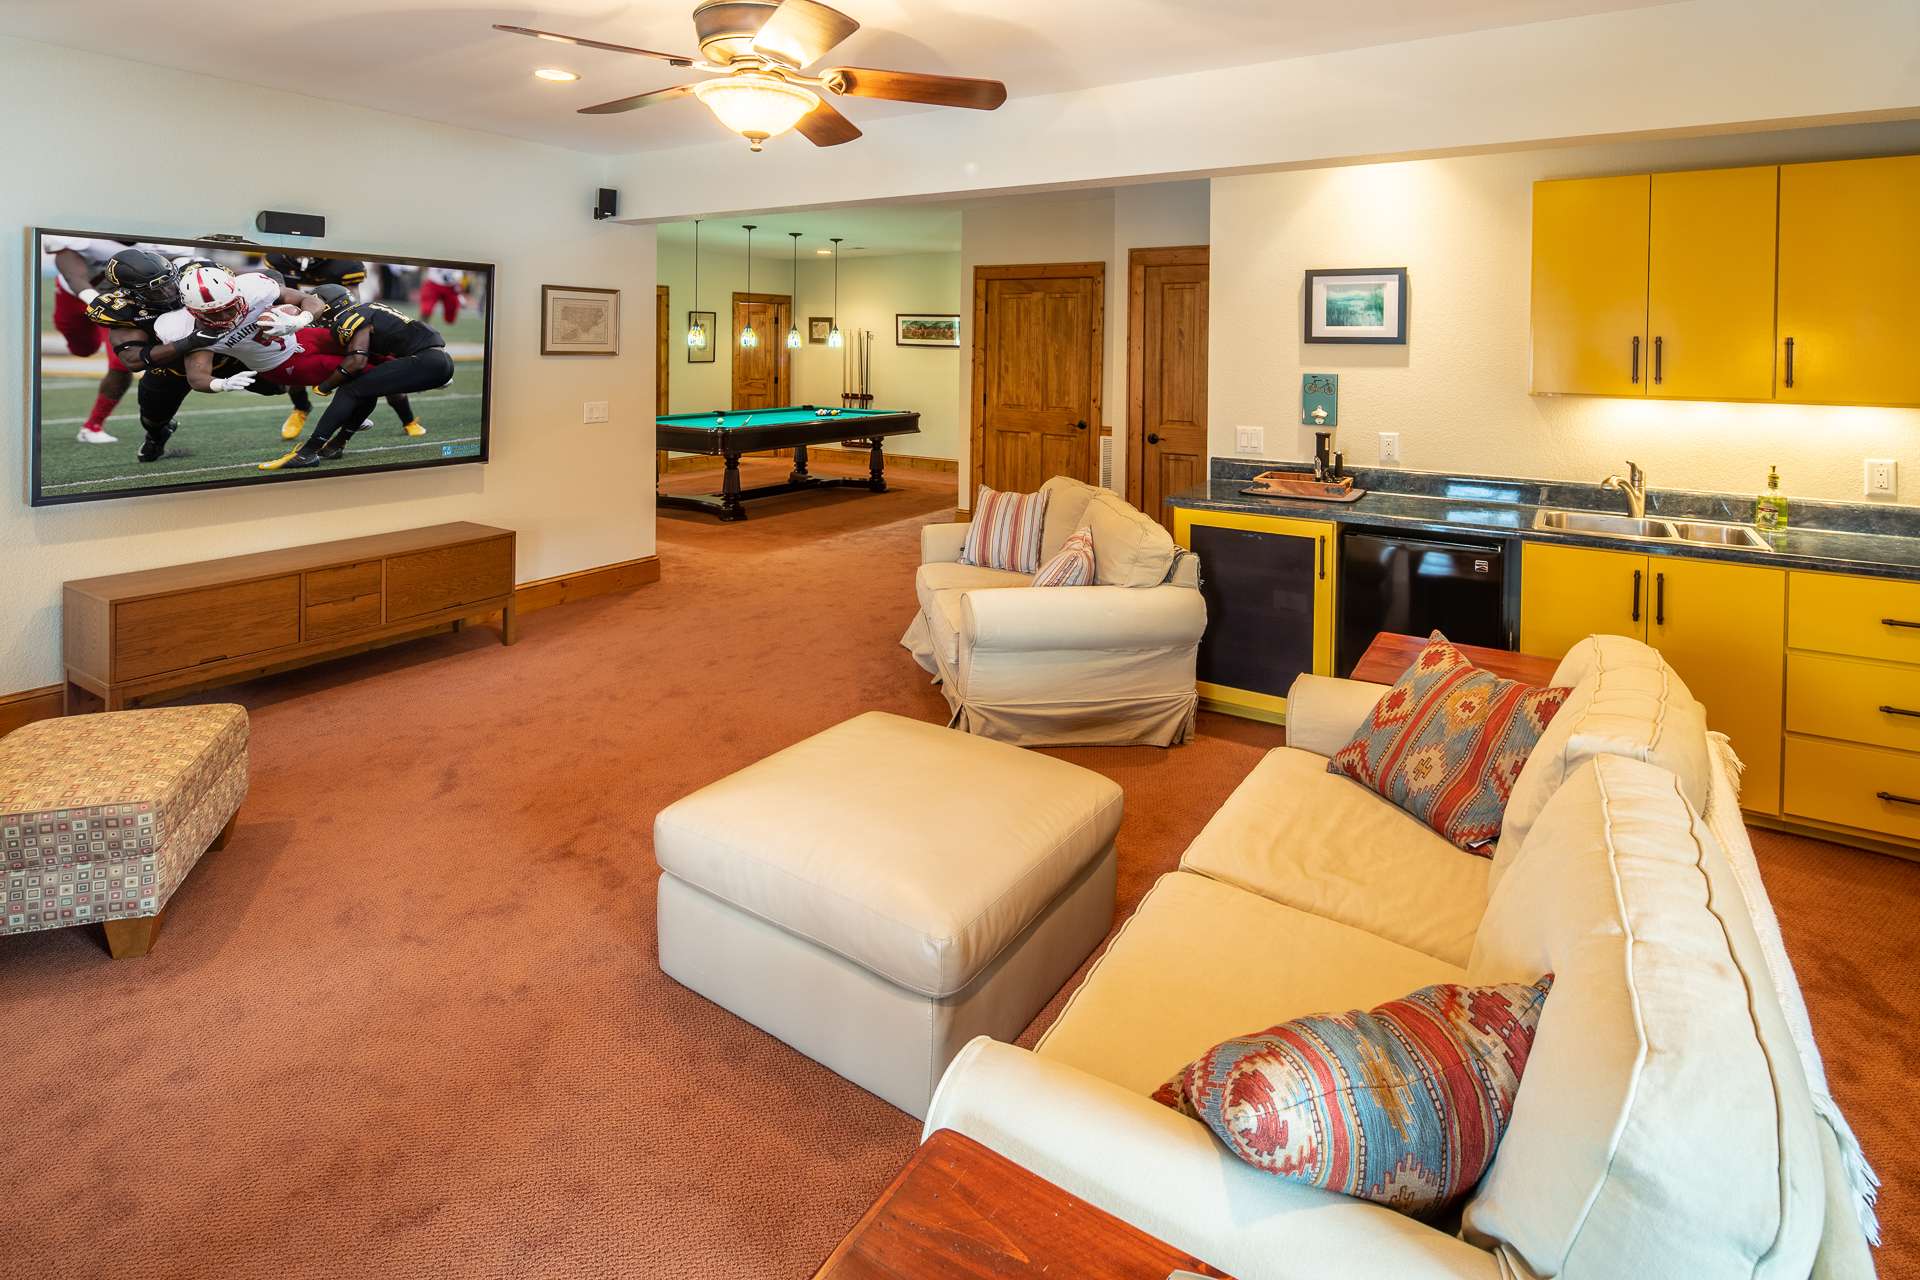 Lower level offers family-sized recreation room providing a great place to watch the big game or a good movie.